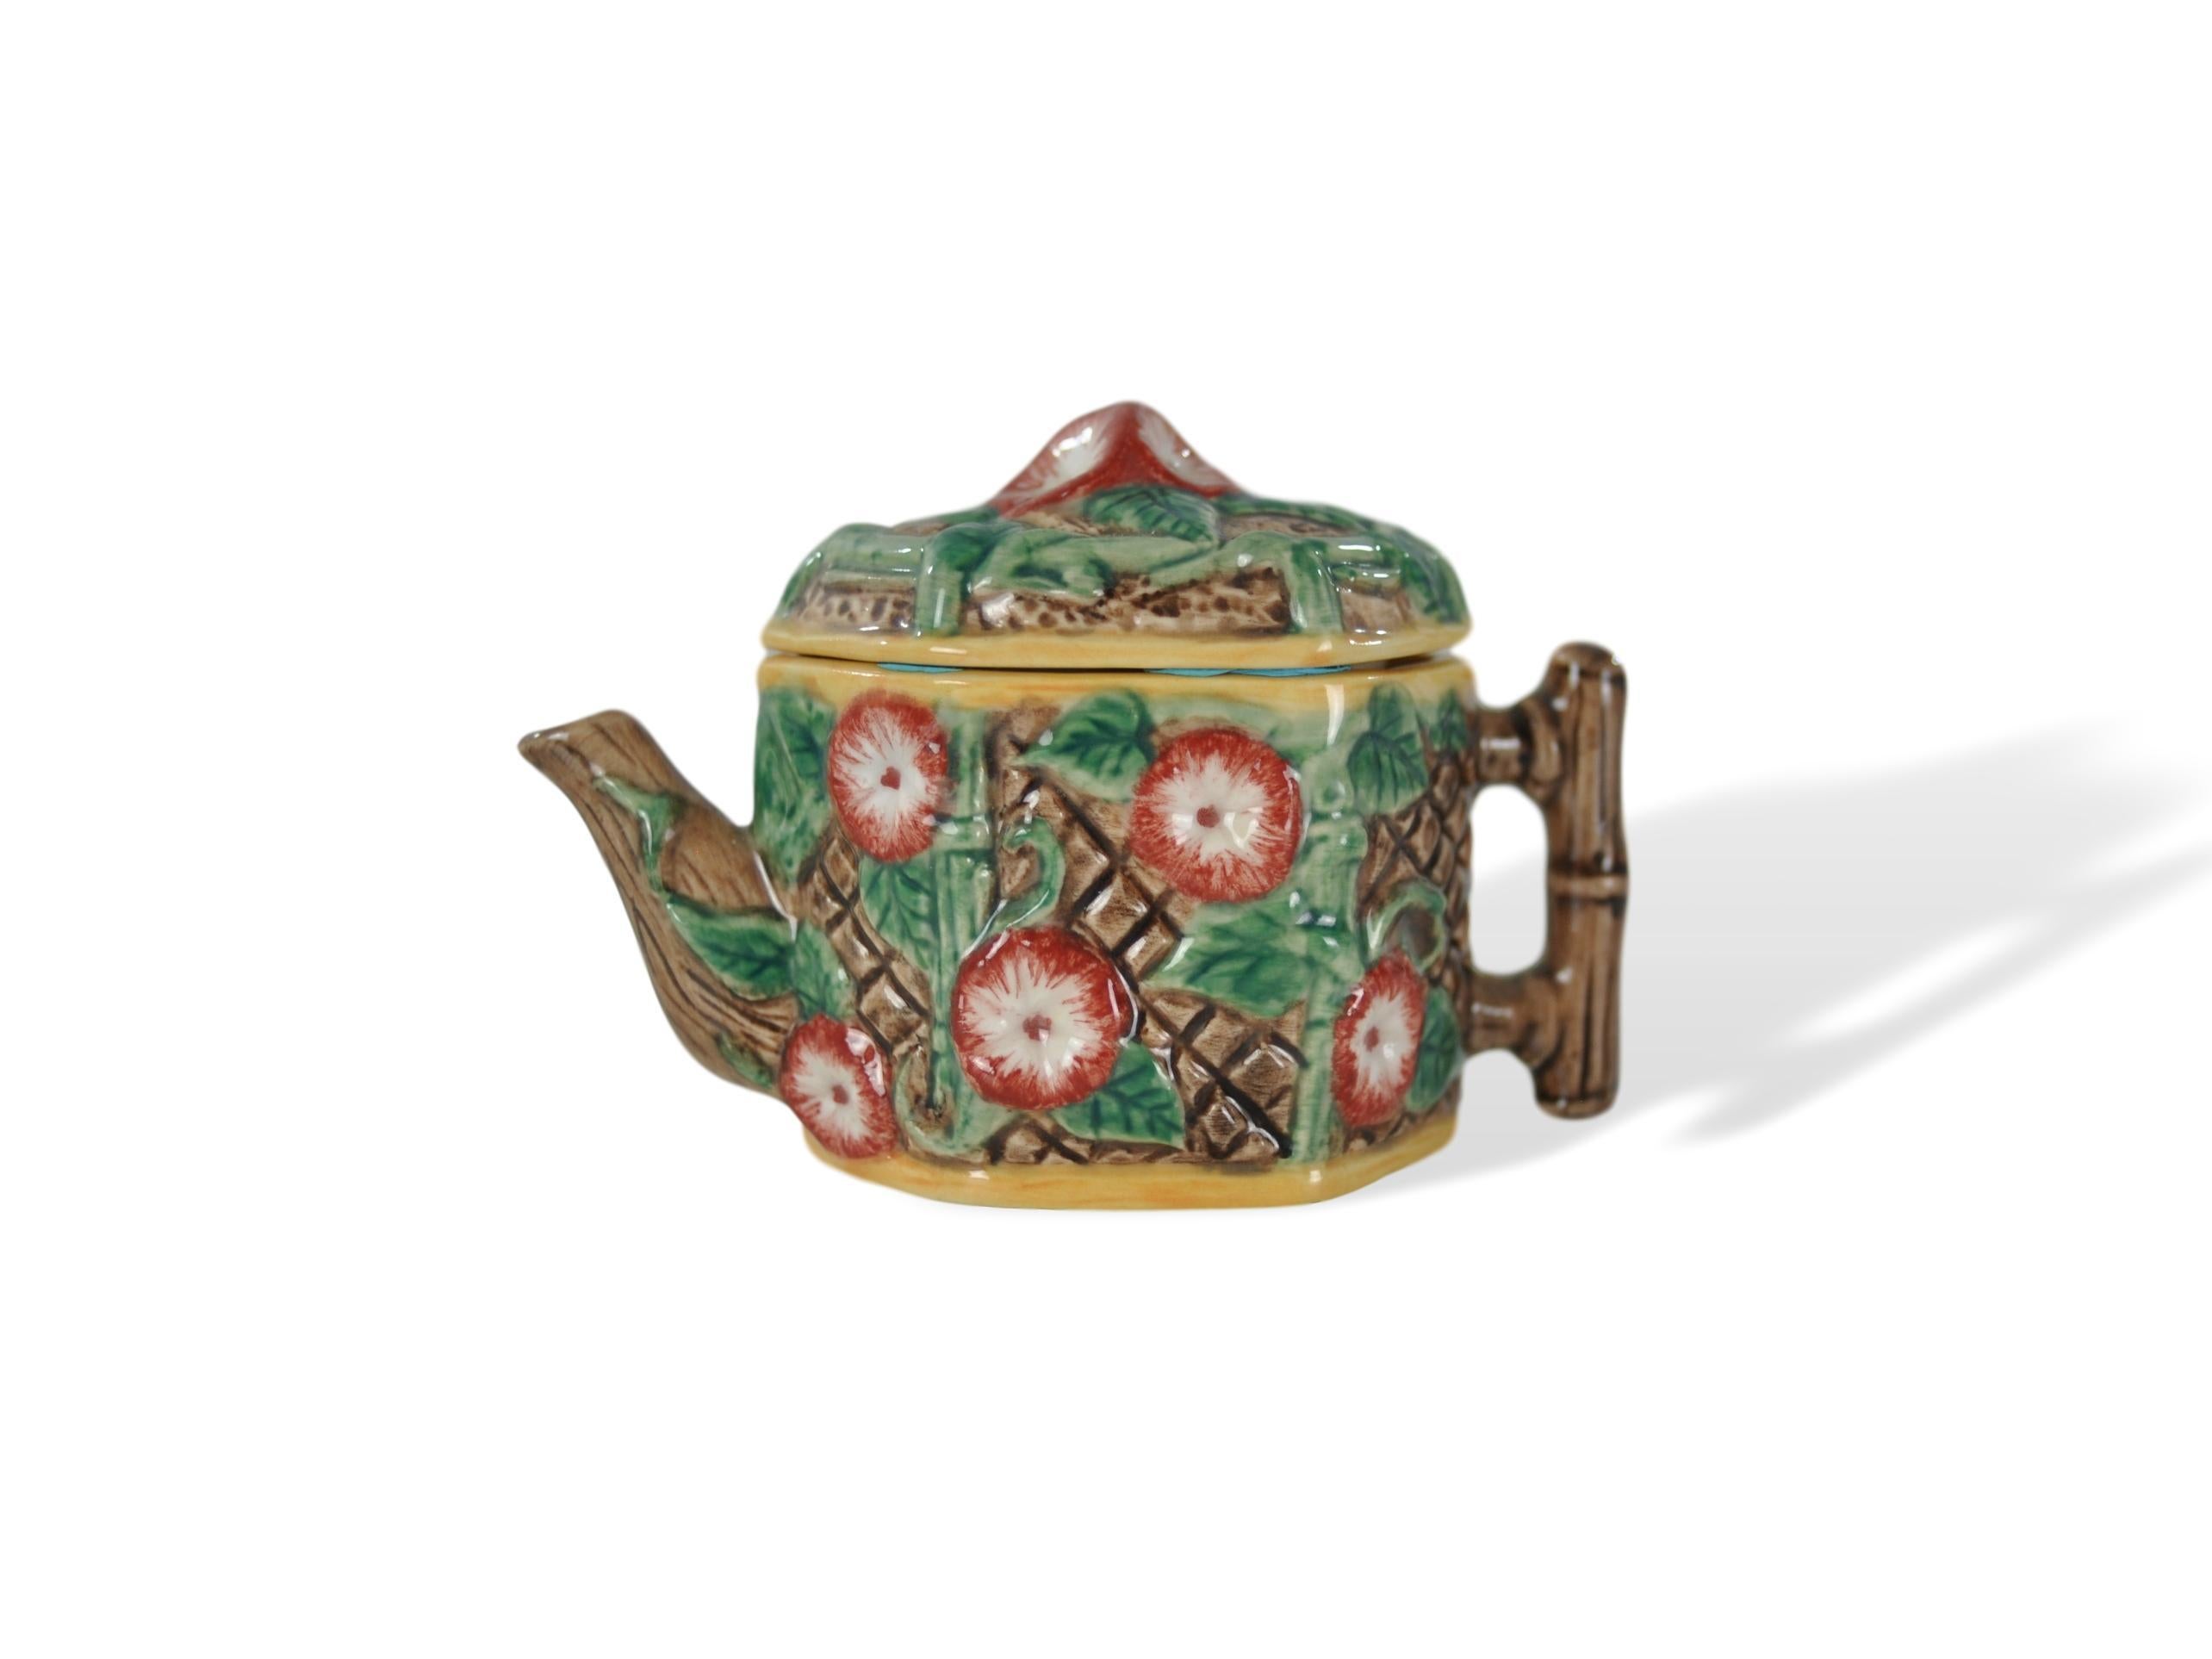 Miniature Majolica-glazed teapot, on a porcelain body, English, morning glories on trellis, English, circa 1920. This charming little piece is of extremely high quality; it is molded and glazed beautifully.
In excellent condition.